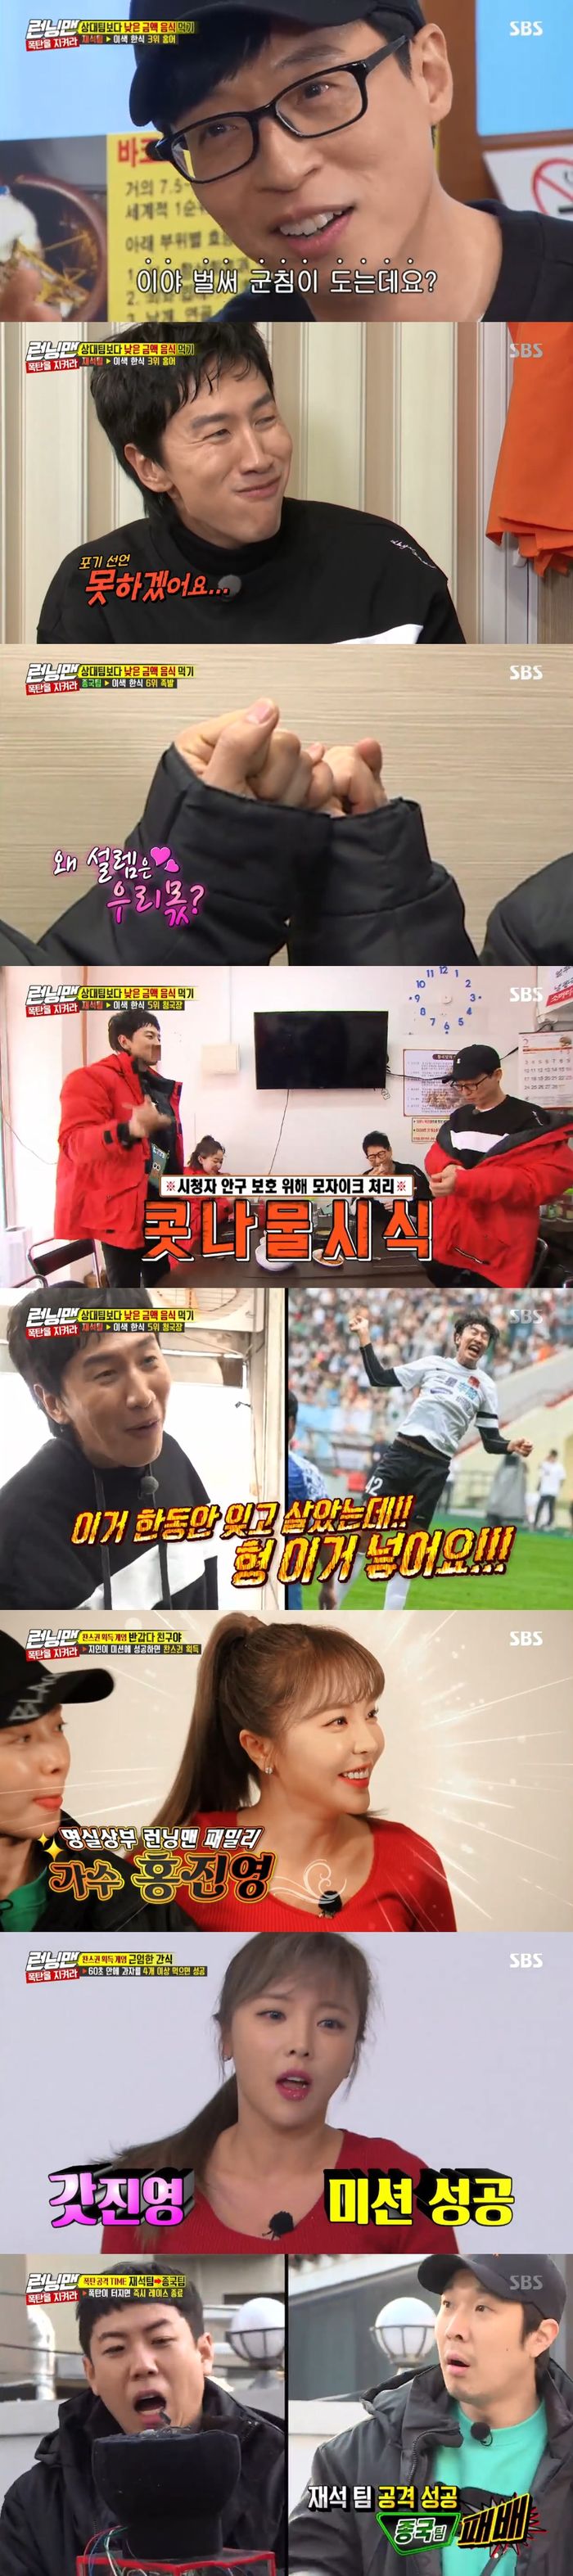 Hong Jin-young made a surprise appearance on Running ManOn SBS Running Man broadcasted on the 17th, Running Man members who perform Bomb Race, which first blows the bombs of the opponent team while eating the unique Korean food, were drawn.The Yoo Jae-Suk team headed to the red fish house to eat the red fish, the third-largest Korean dish.However, Kim Jong-kook had to eat Honger at a lower price than the 11,000 won used by the team.The Yoo Jae-Suk team ordered Honger Ramen and decided that the person who endured the unique taste of the honger and ate the most delicious had the penalty exemption right.Ji Suk-jin failed to take a bite of red-ish ramen and pass it over. Jeon So-min and Lee Kwang-soo were anxious to say that they had never eaten red-ish ramen.I originally like the hong-e - first at my cousins sisters wedding and then I enjoyed the hong-e from then on, Yoo Jae-Suk said.However, he smelled the smell of red ramen and looked rigid with a firm expression, saying, I have already been drinking.However, Yoo Jae-Suk, who tasted a bite, said, This is a delicacy.Lee Kwang-soo said, I have never eaten redfish, so I am brave.Lee Kwang-soo put the red ramen in a bite, but he could not chew it and declared I can not do it.Eventually, he had the penalty exemption - the most deliciously eaten Yoo Jae-Suk.Meanwhile, Kim Jong-kooks team instantly invited Hong Jin-young, who was shooting commercials near Gangnam to acquire the lowest price among the hints.Haha watched Kim Jong-kook, Song Ji-hyo, and Hong Jin-young and said, It is like an American drama. Miwoo Love Line and Running Man Love Line meet like this.Hong Jin-young was able to eat the crown and snacks safely; Kim Jong-kooks team won the lowest price and could eat the mountain octopus for 5,900 won.The Yoo Jae-Suk team then chose the green line among the Kim Jong-kook teams bombs.The Kim Jong-kook teams bomb exploded and the Bomb Race ended with the victory of the Yoo Jae-Suk team.